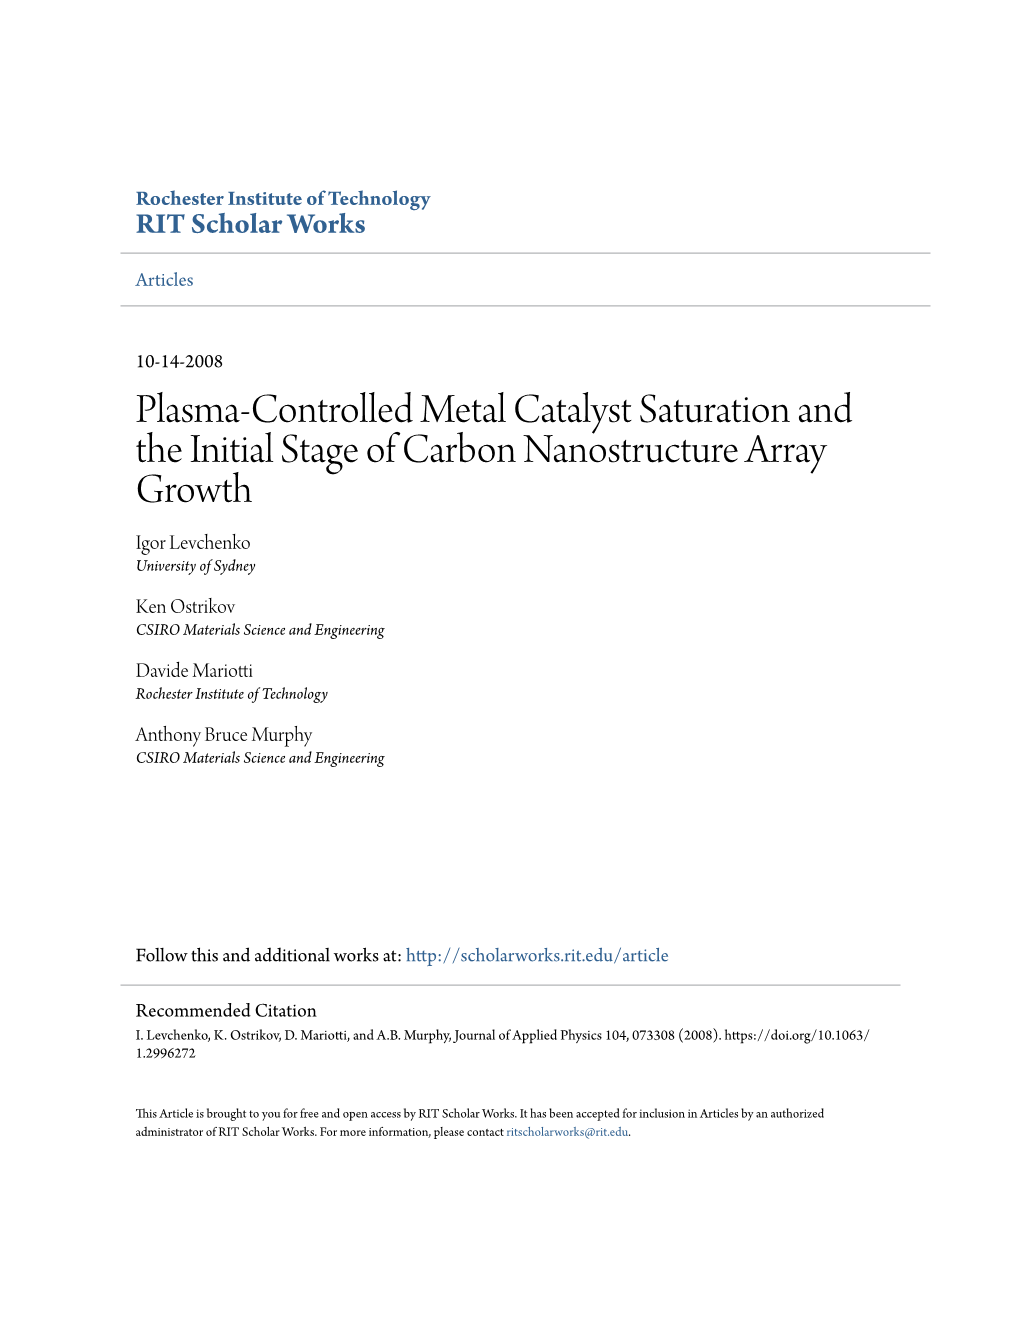 Plasma-Controlled Metal Catalyst Saturation and the Initial Stage of Carbon Nanostructure Array Growth Igor Levchenko University of Sydney